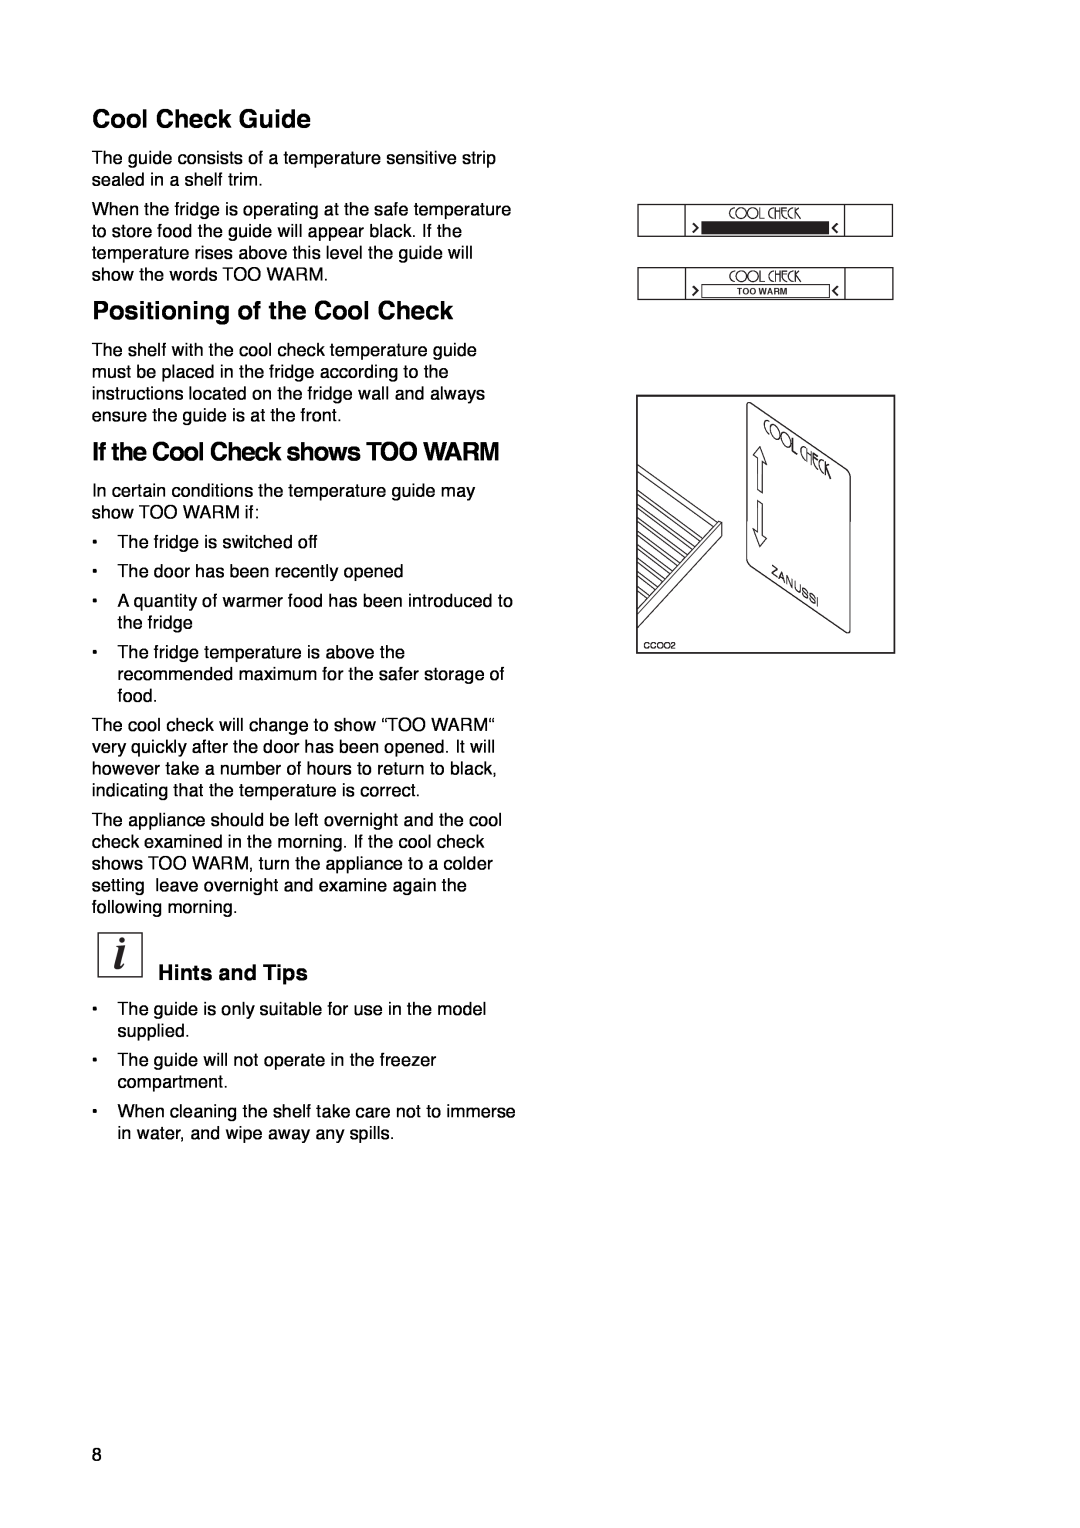 Zanussi ZK 61/27 RAL Cool Check Guide, Positioning of the Cool Check, If the Cool Check shows TOO WARM, Hints and Tips 